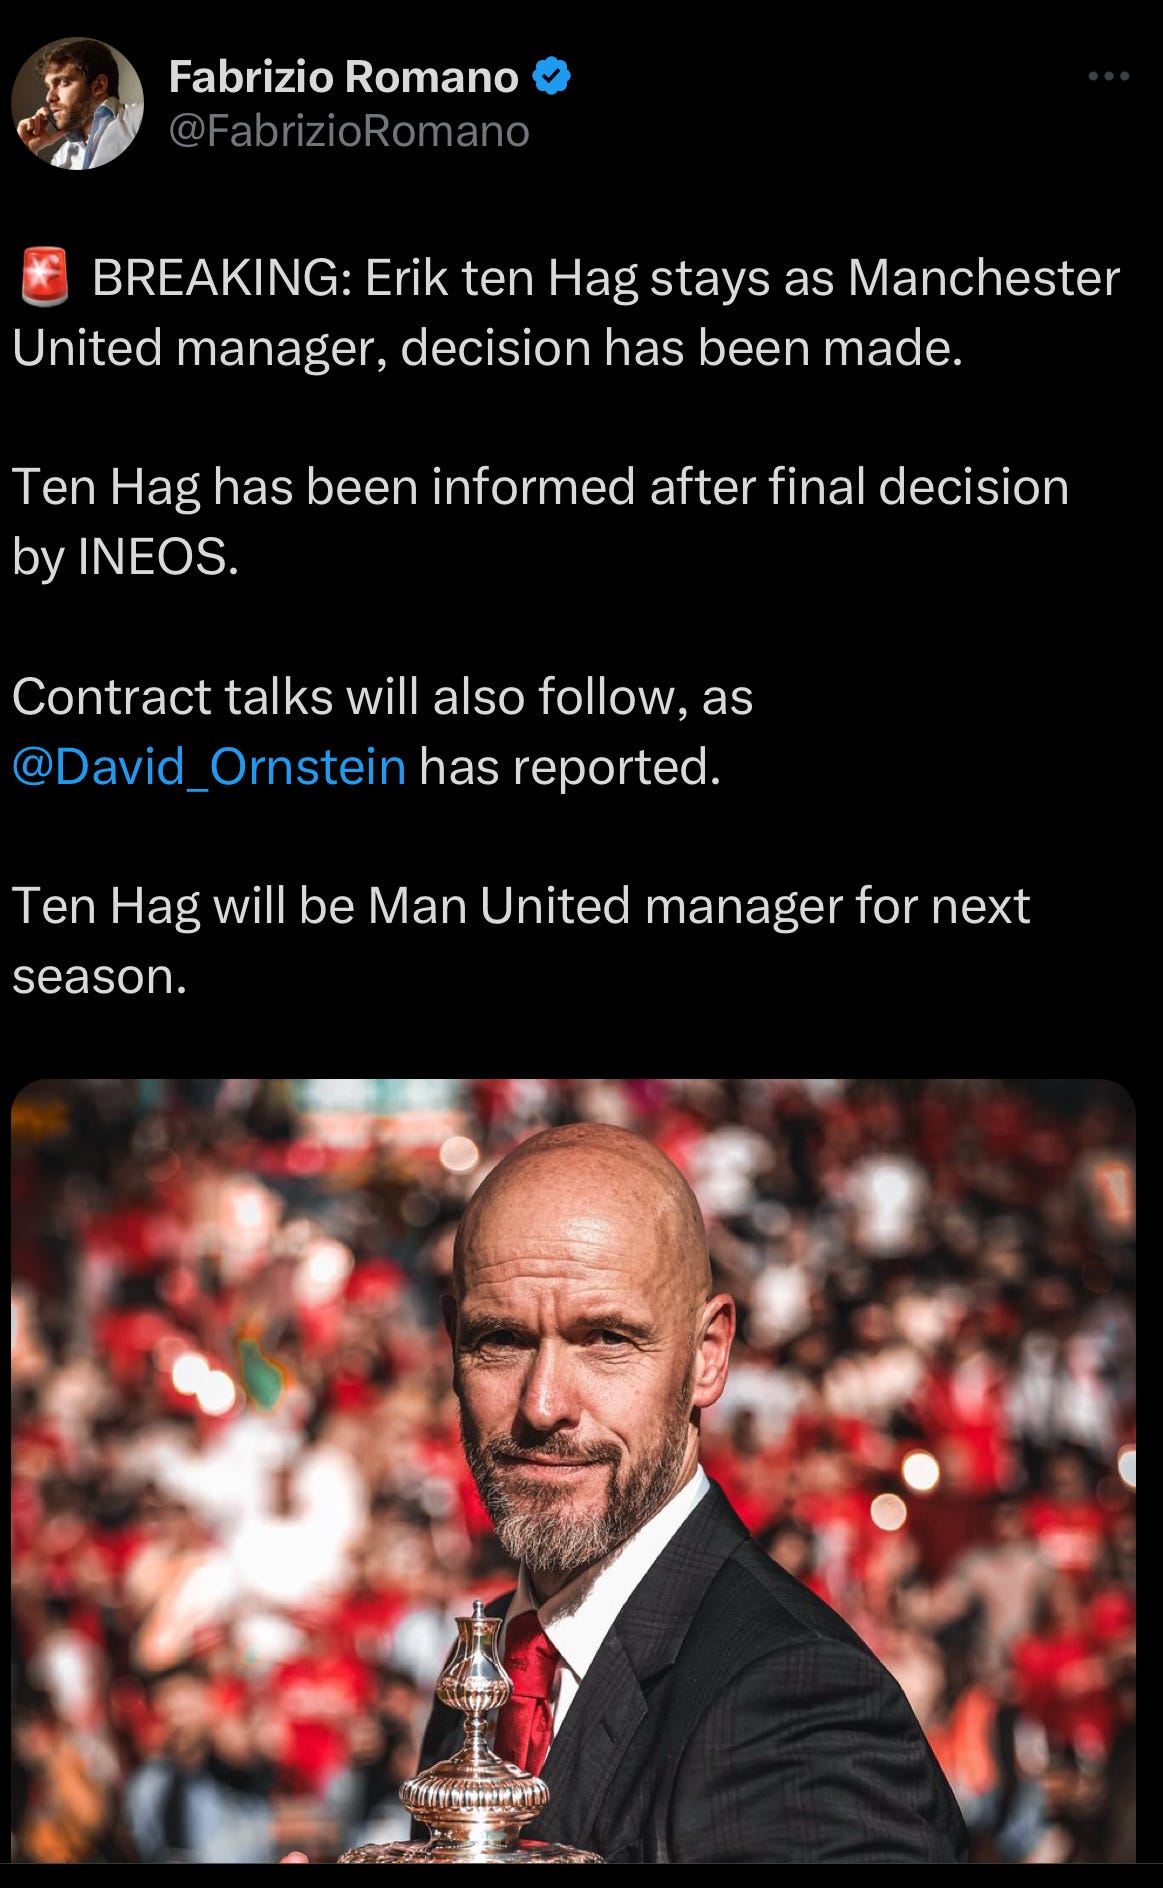 A tweet by Fabrizio Romano confirming Erik ten Hag will remain as Manchester United manager.